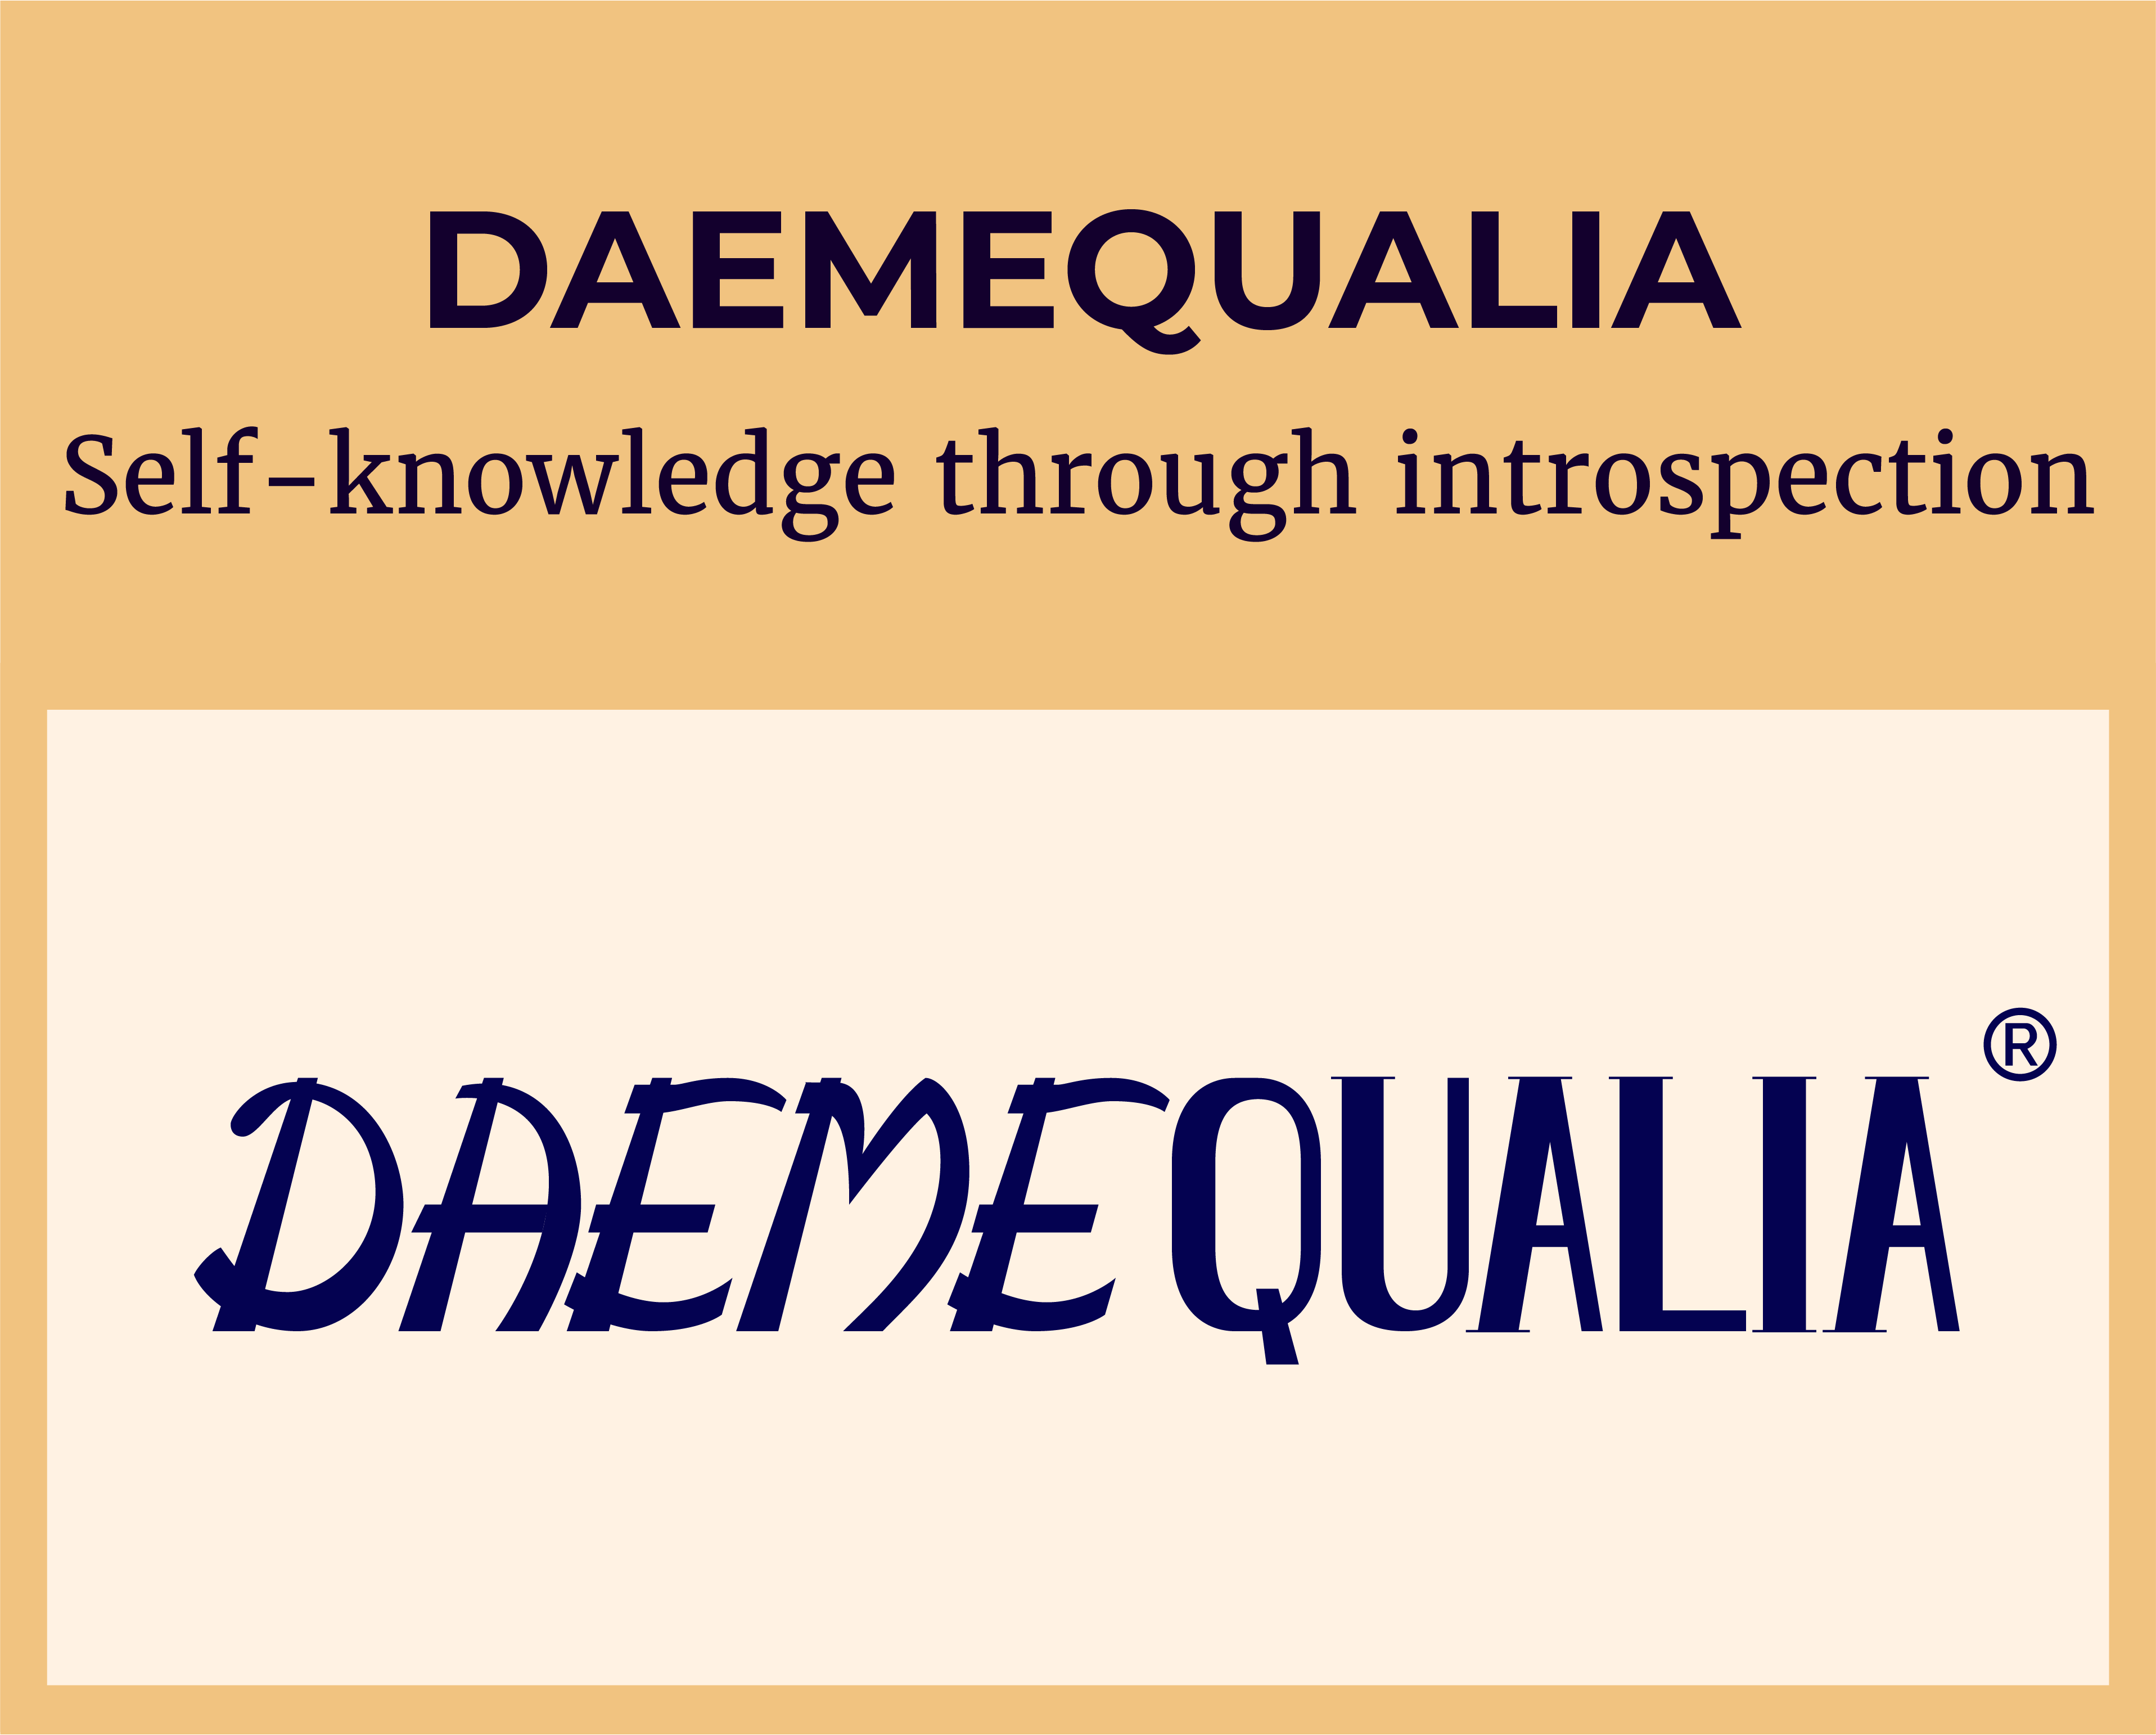 Logo of DAEMQUALIA - the technology that leads to self-knowledge through introspection